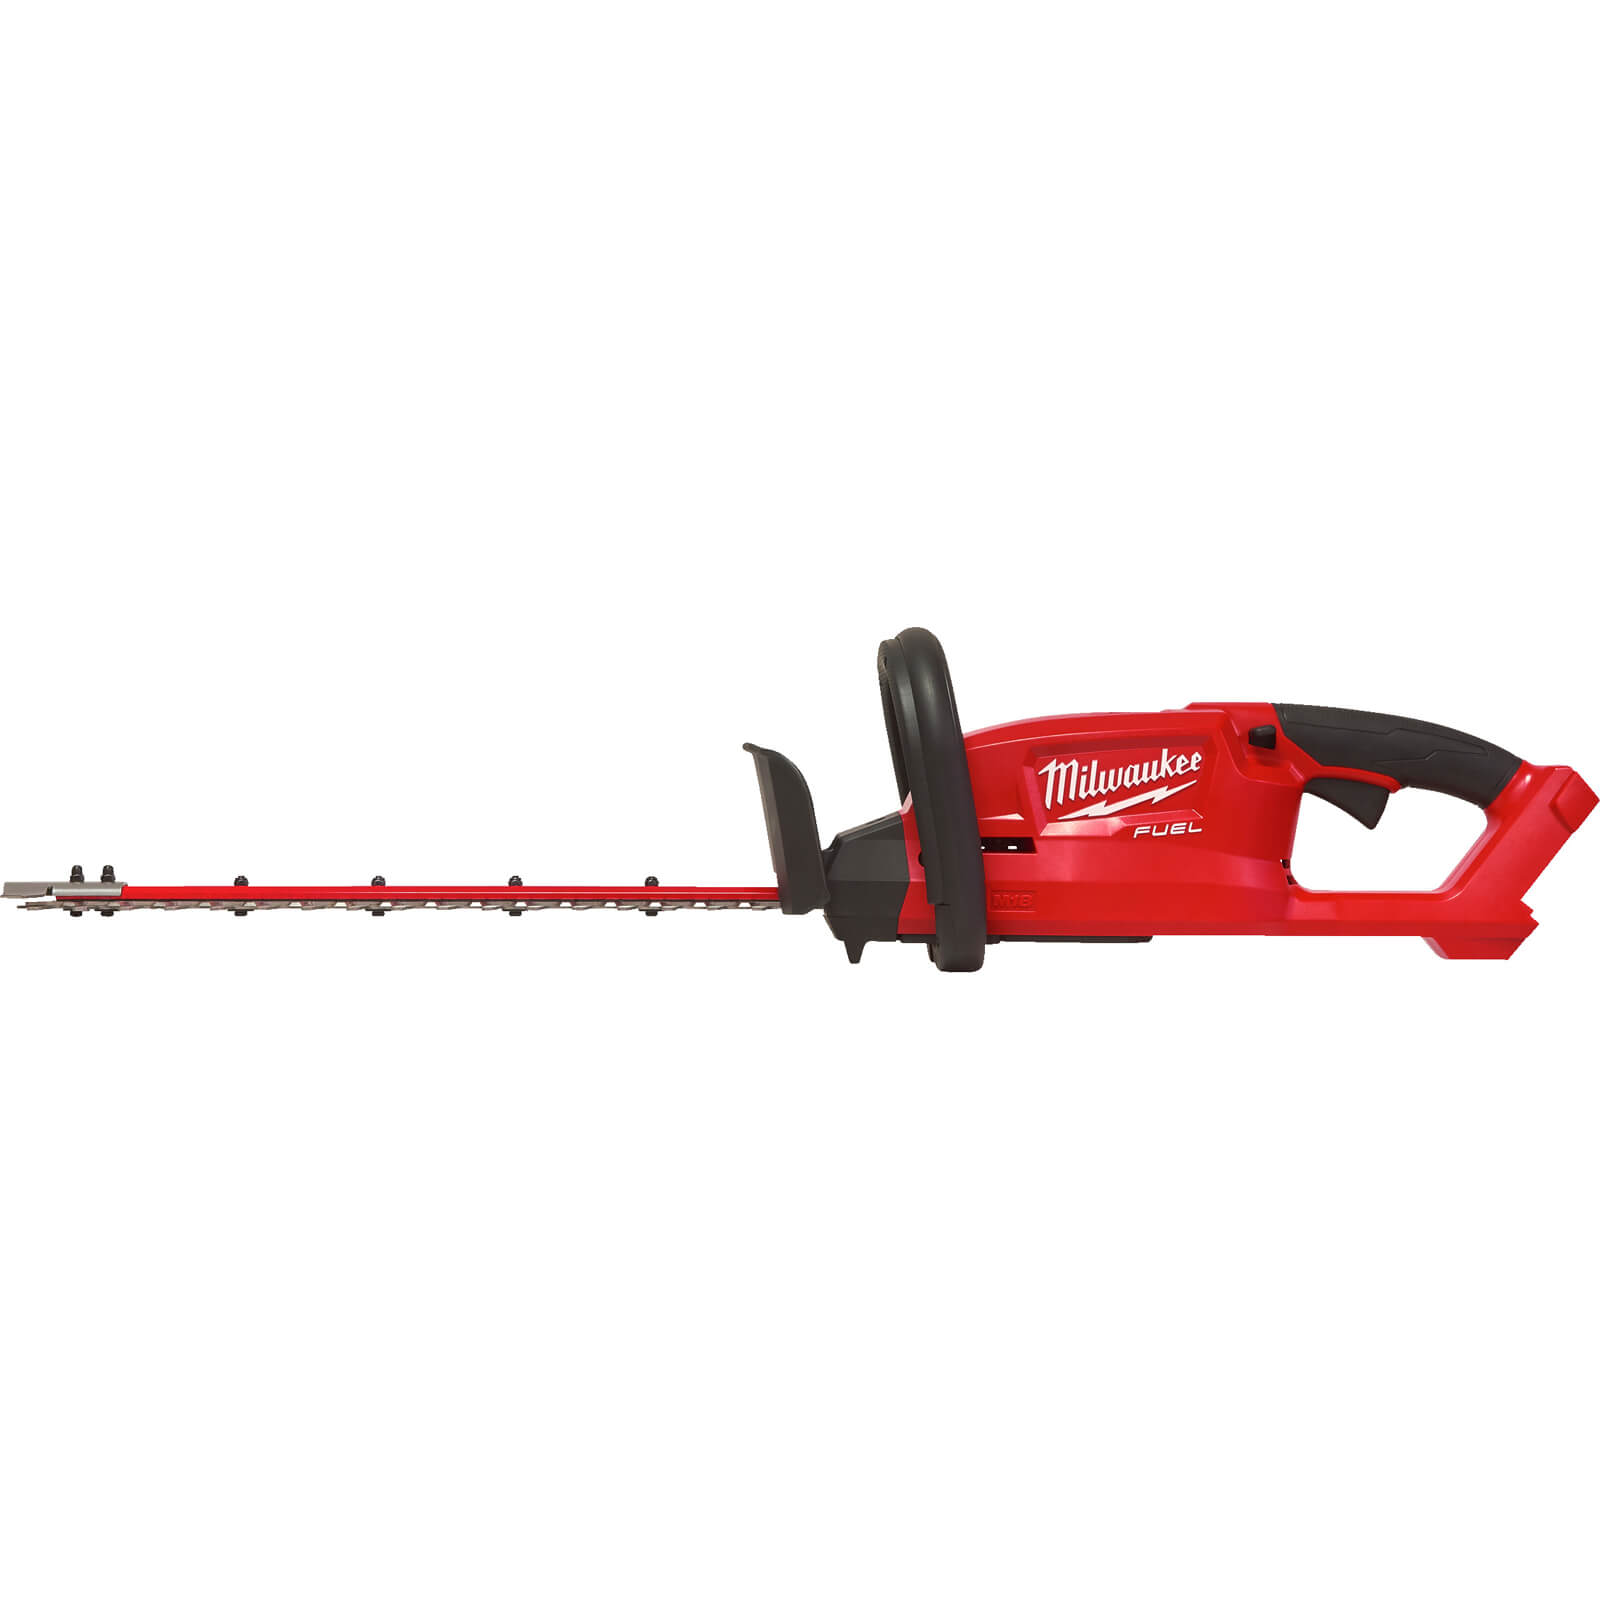 Milwaukee M18 FHT45 Fuel 18v Cordless Brushless Hedge Trimmer 450mm No Batteries No Charger